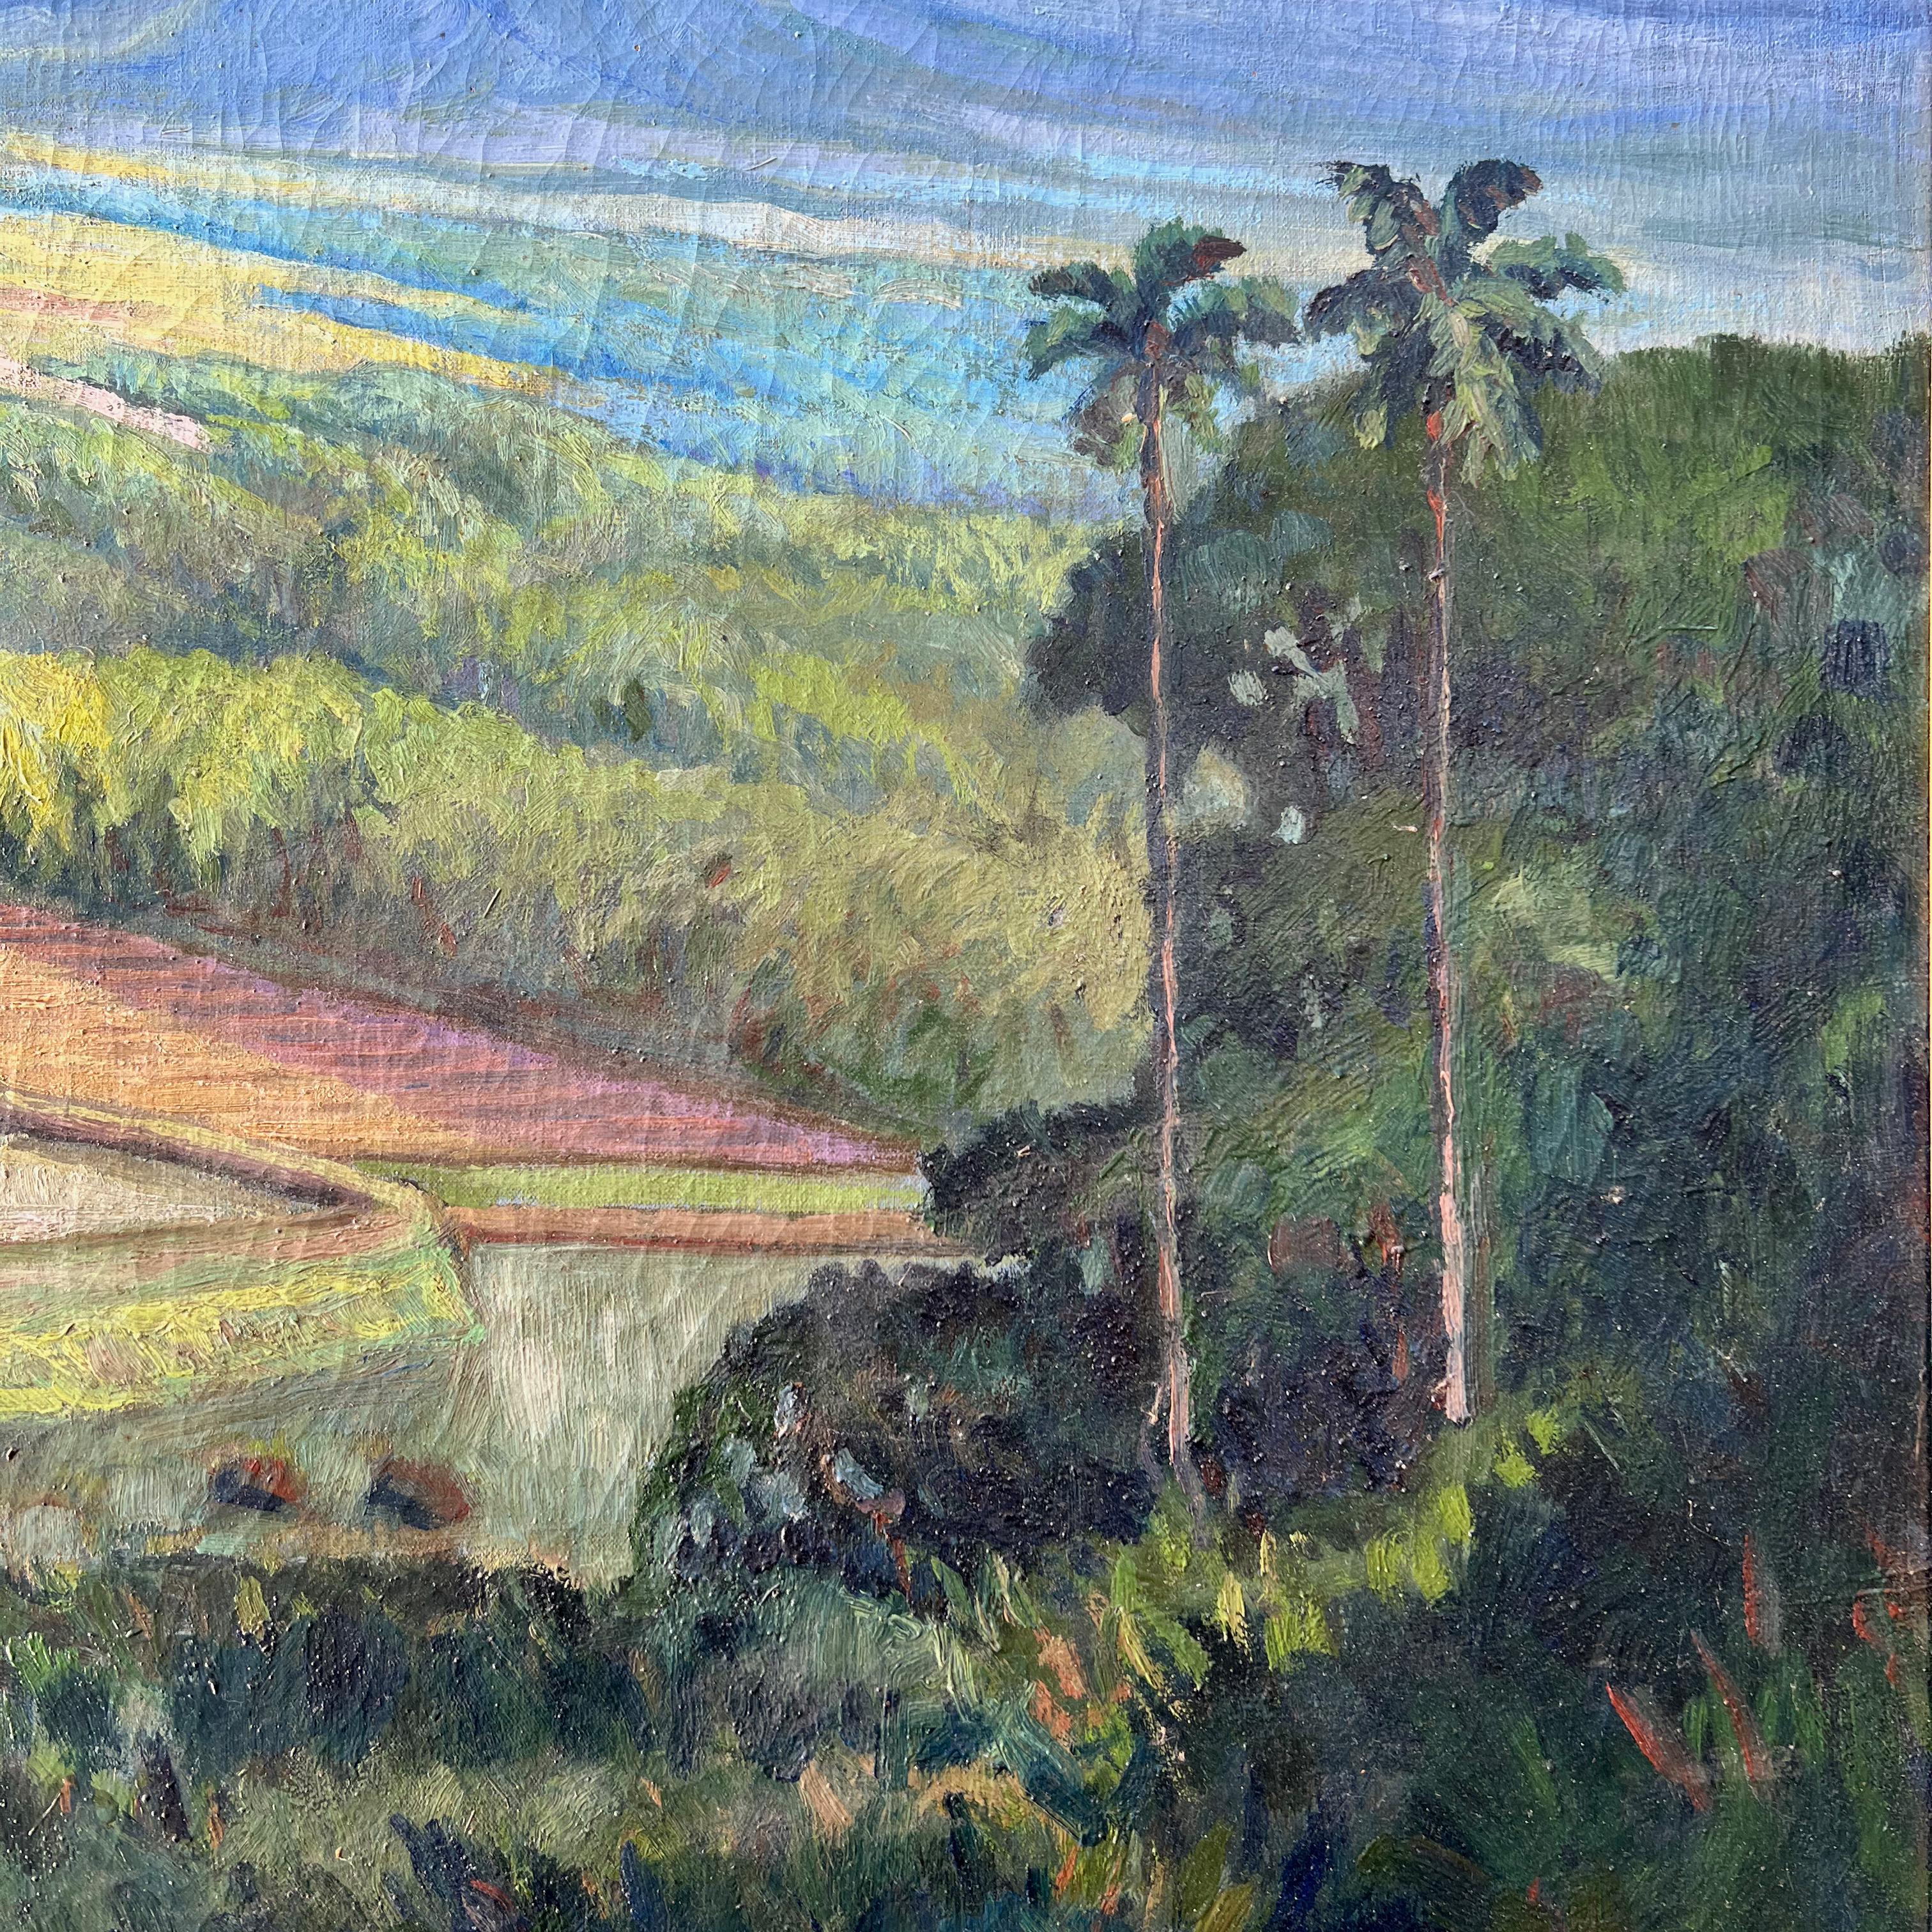 Hand-Painted Rice Fields on Bali - Oil on canvas For Sale